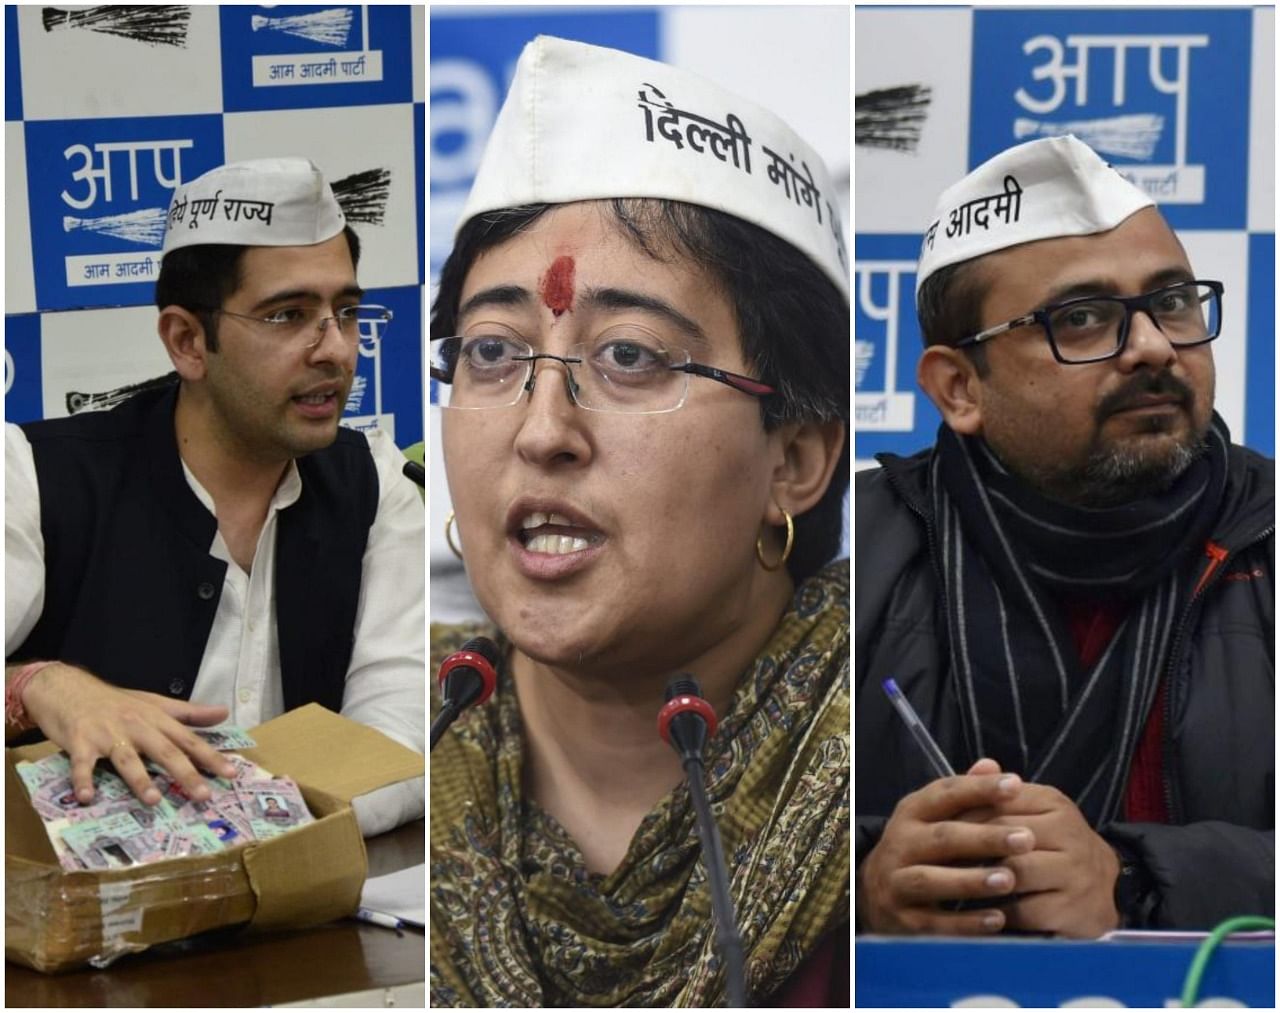 (L to R) AAP leaders Raghav Chadha, Atishi and Dilip Pandey. (PTI Photos)